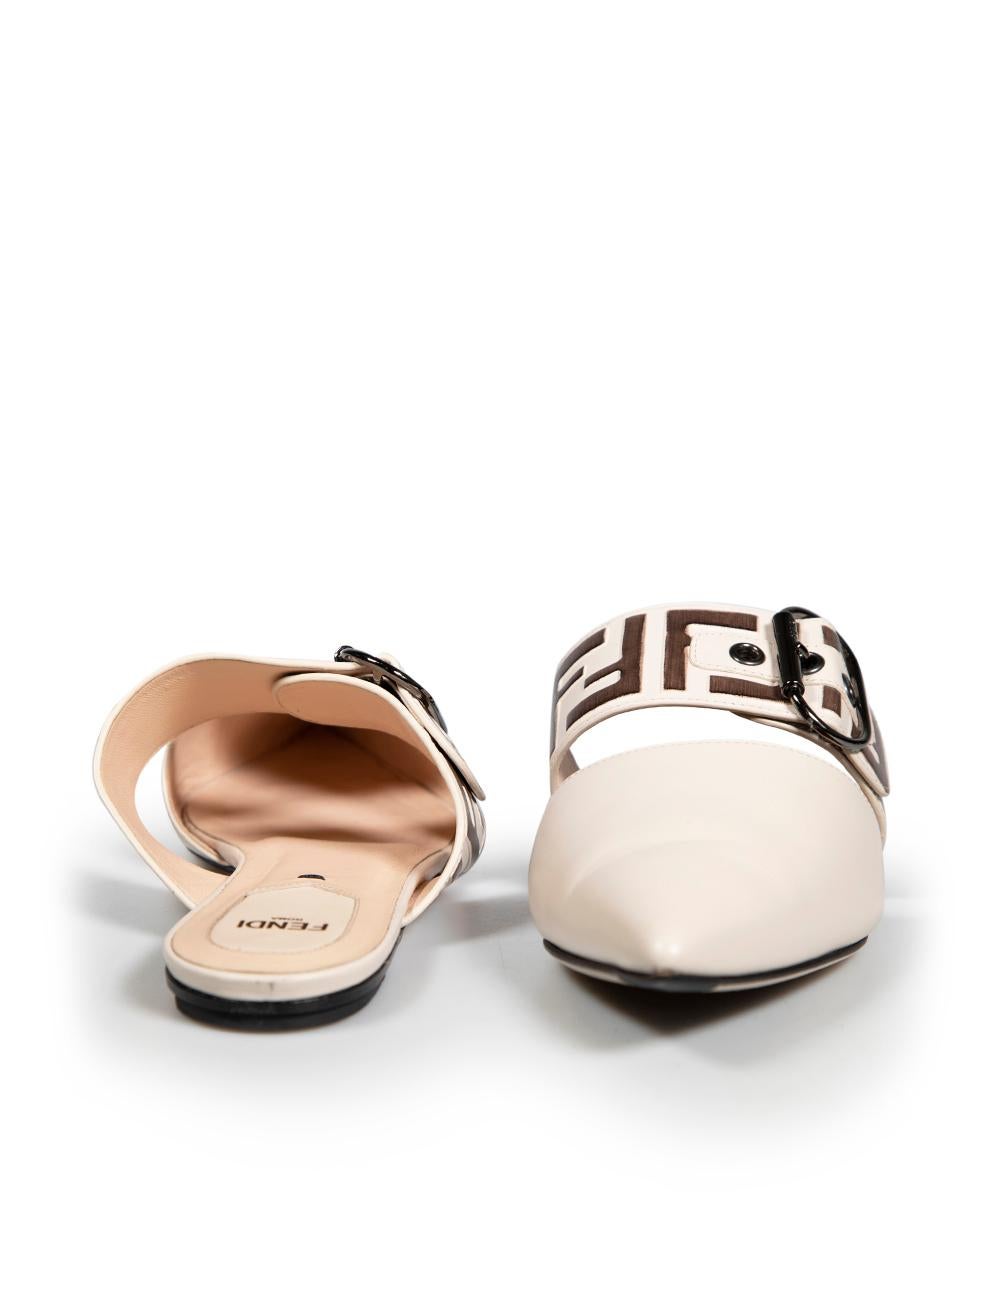 Fendi Ecru Leather FF Motif Buckle Mules Size IT 37 In Good Condition For Sale In London, GB